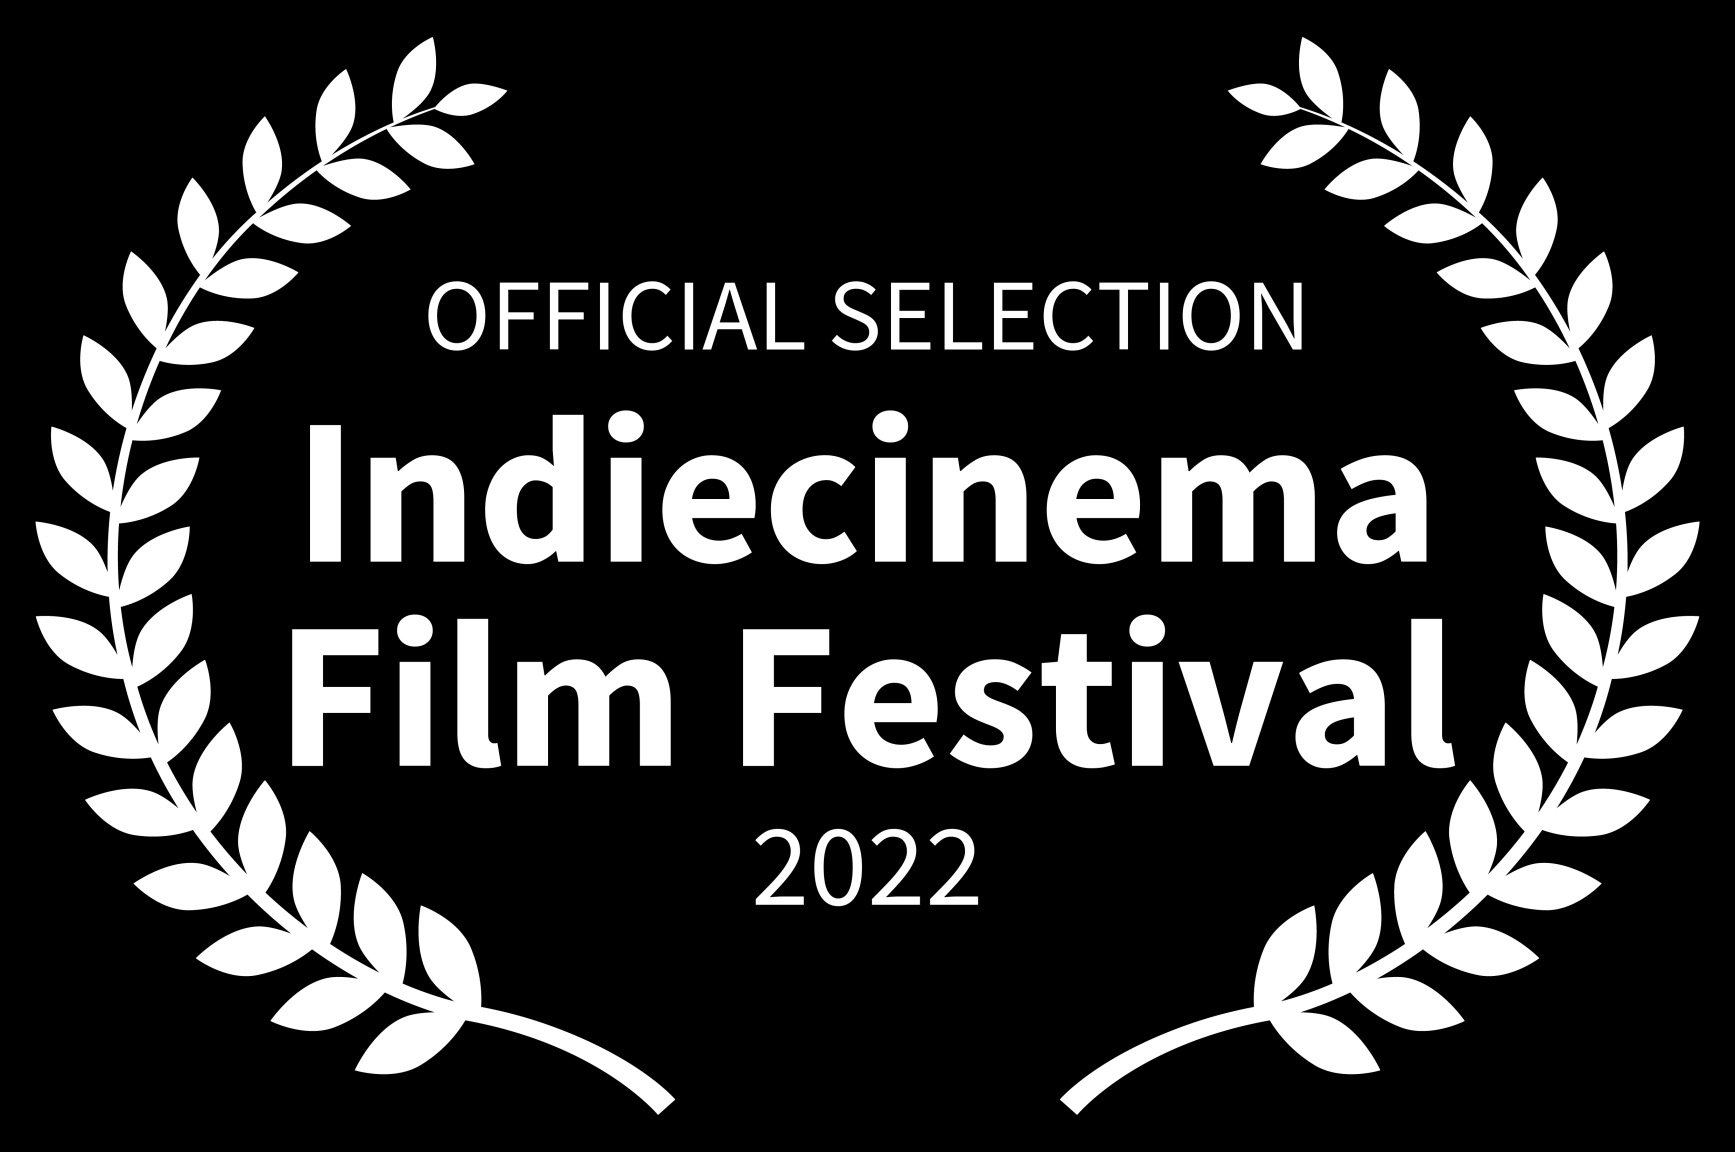 OFFICIAL SELECTION – Indiecinema Film Festival – 2022